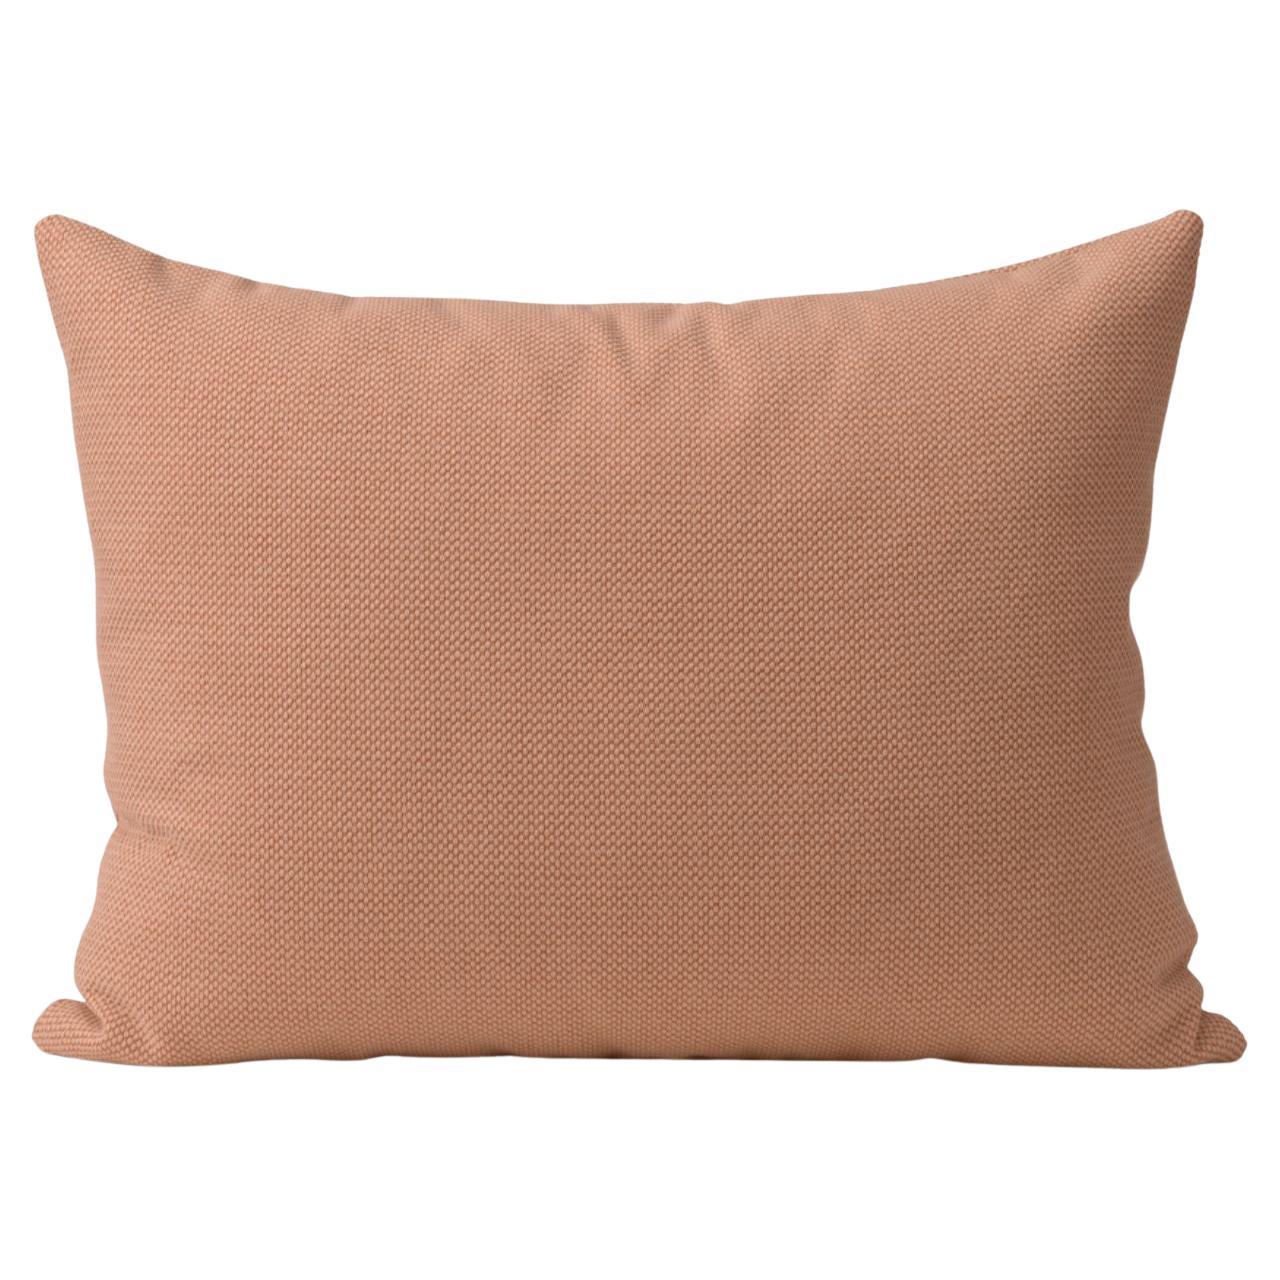 Galore Cushion Square Fresh Peach by Warm Nordic For Sale